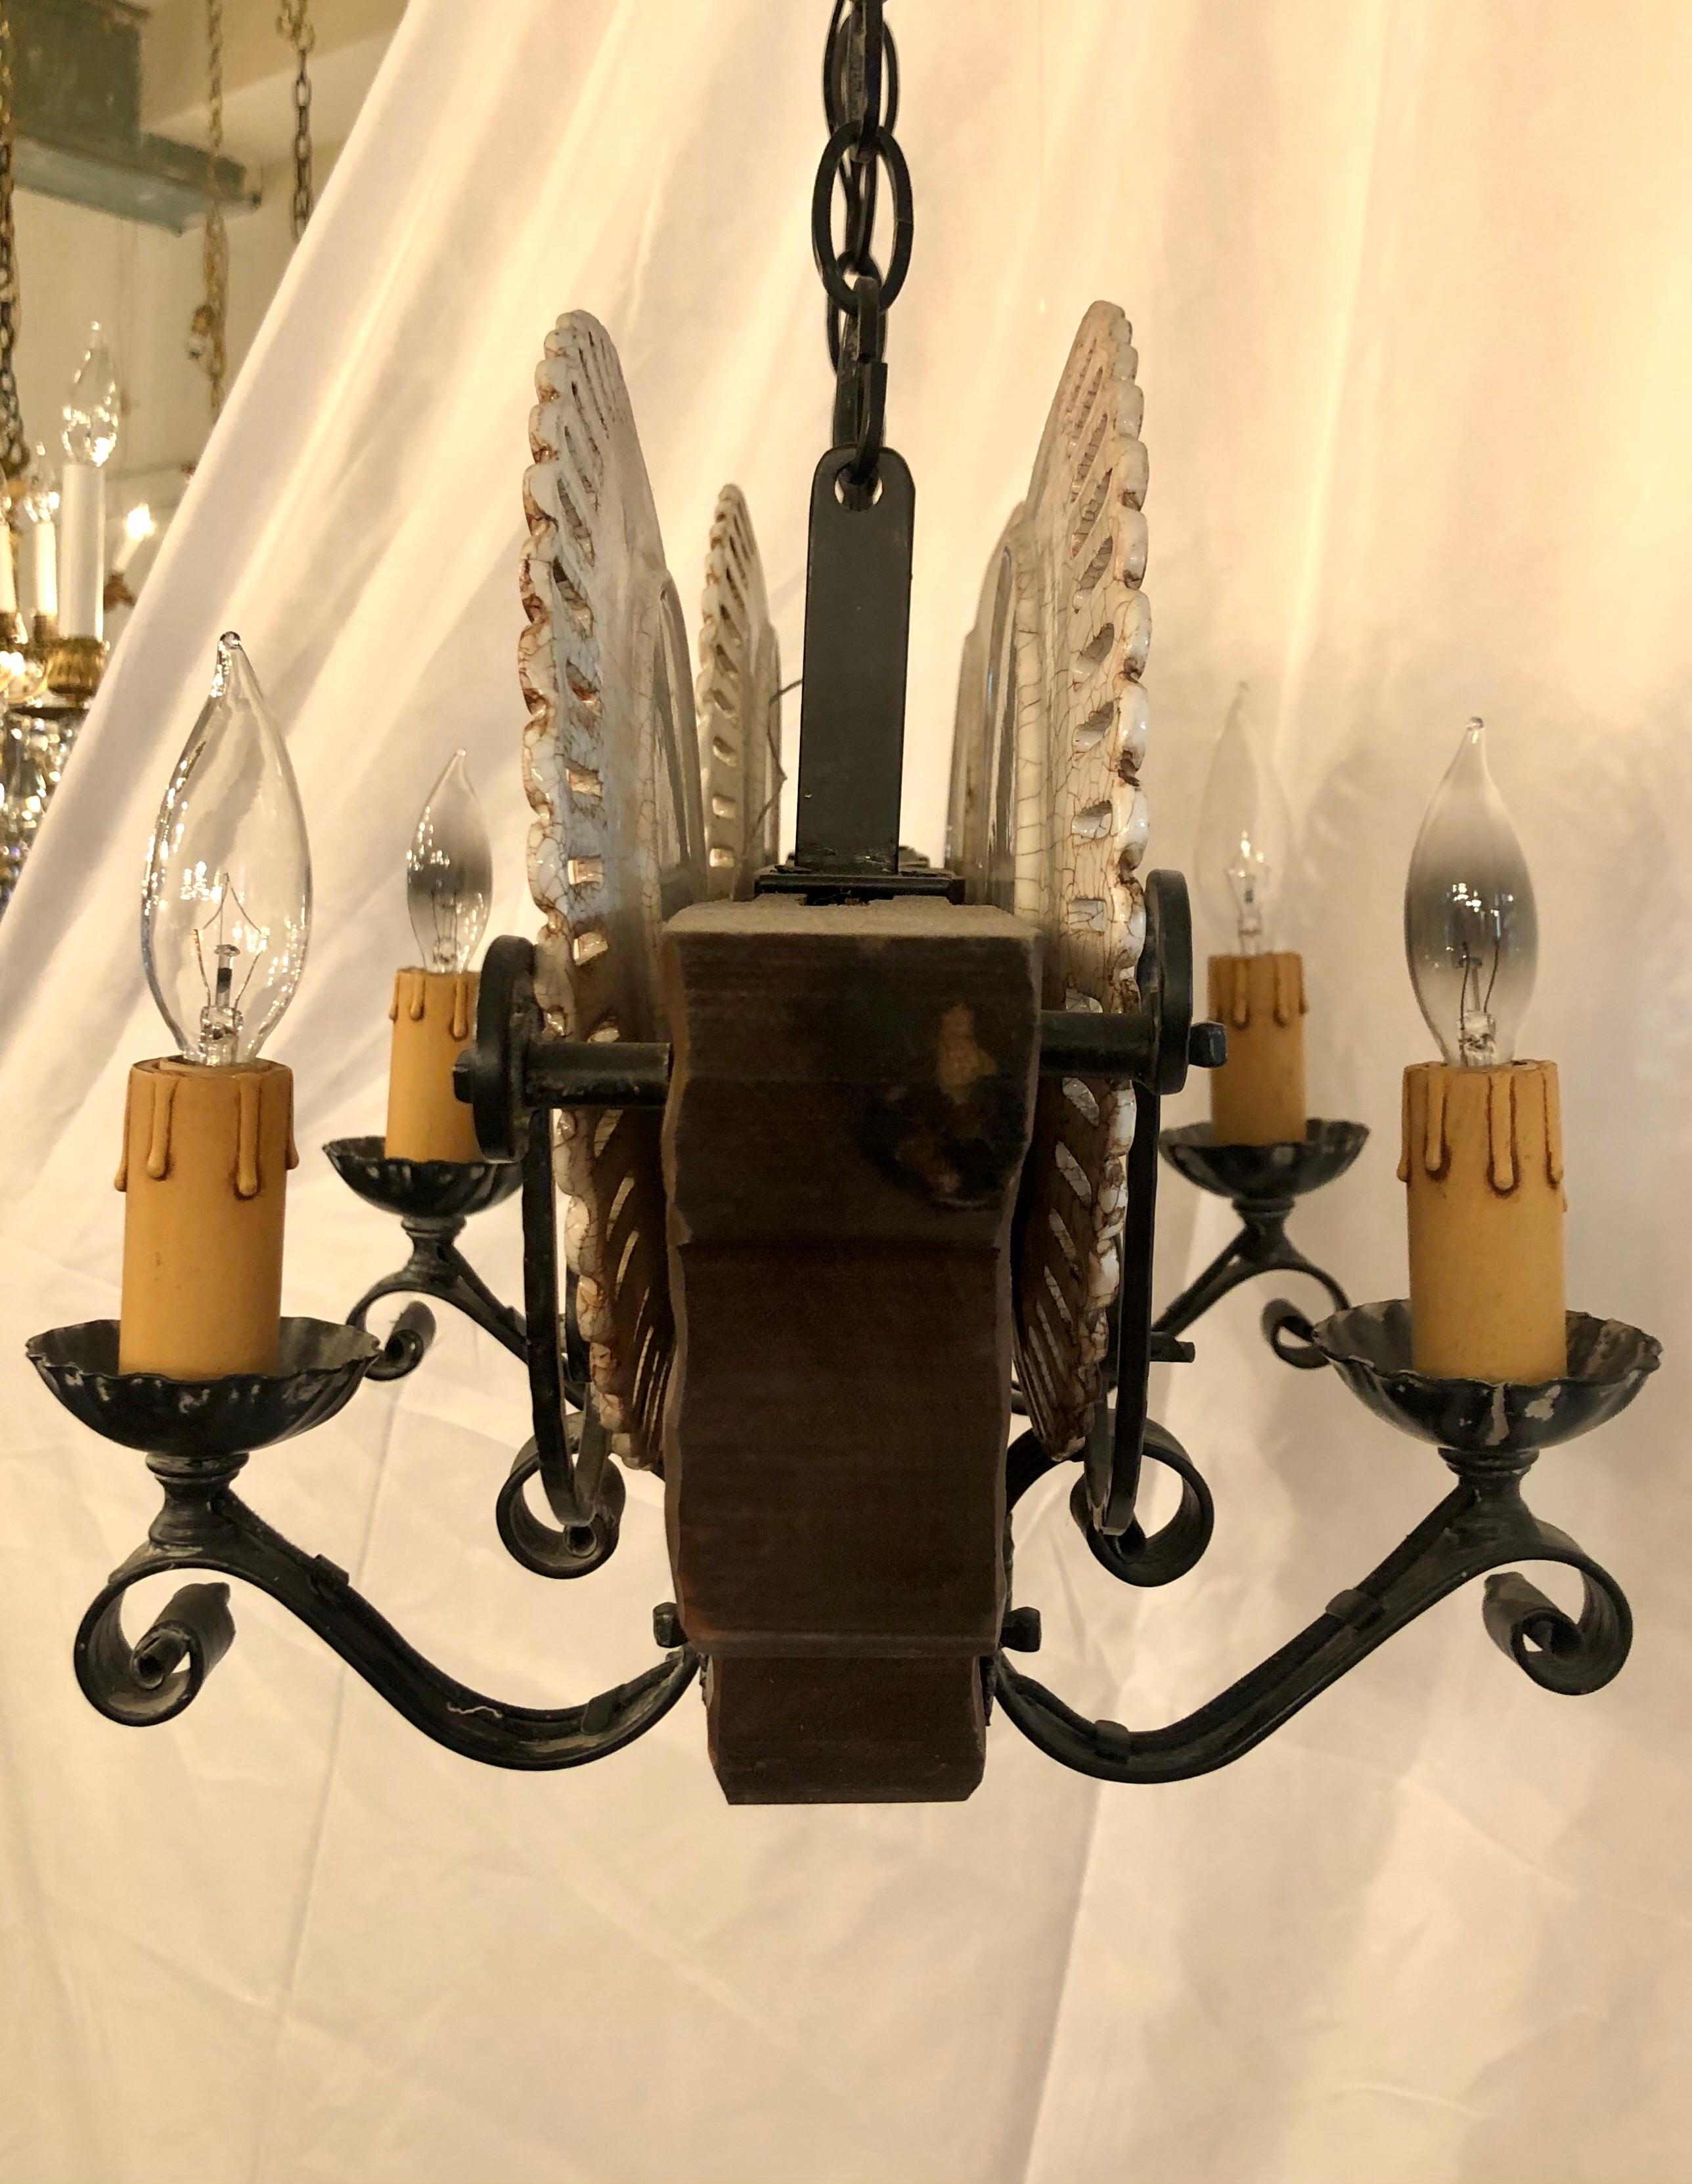 20th Century Hand-Made Wrought Iron and Carved Wood Porcelain Plate-Holder Chandelier For Sale